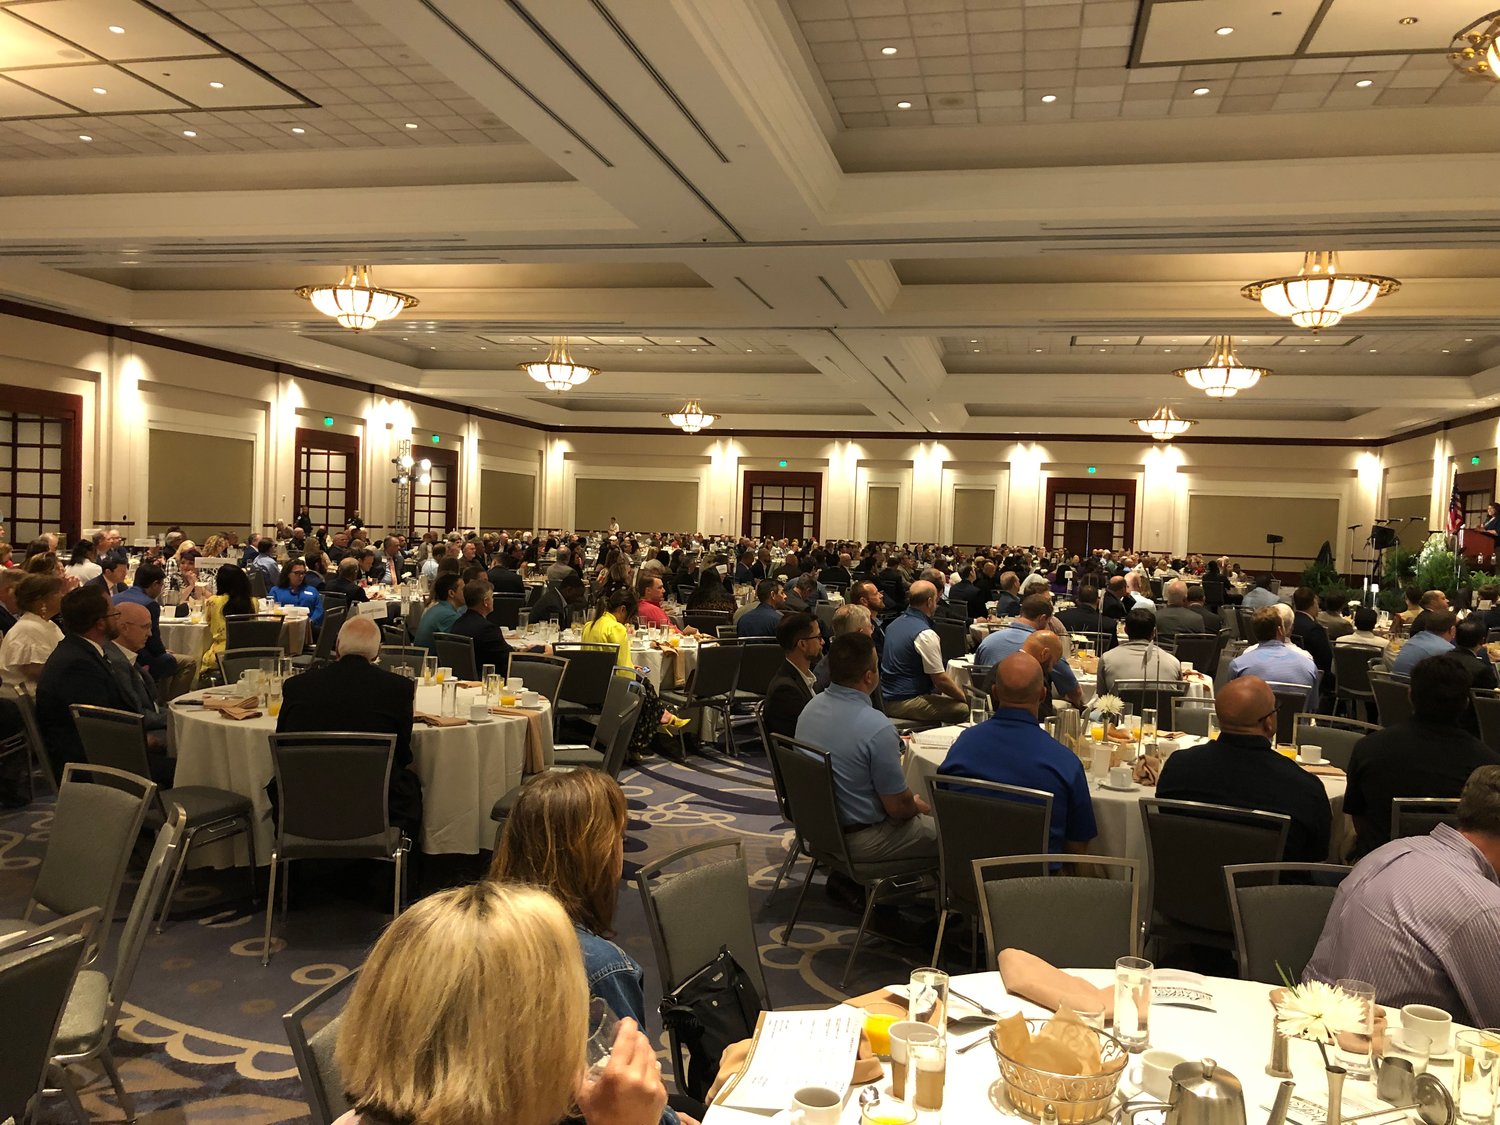 Nearly 1,000 people gathered for the Cobb County Prayer Breakfast on the National Day of Prayer, Thursday, May 5, 2022. (Photo/J. Gerald Harris)